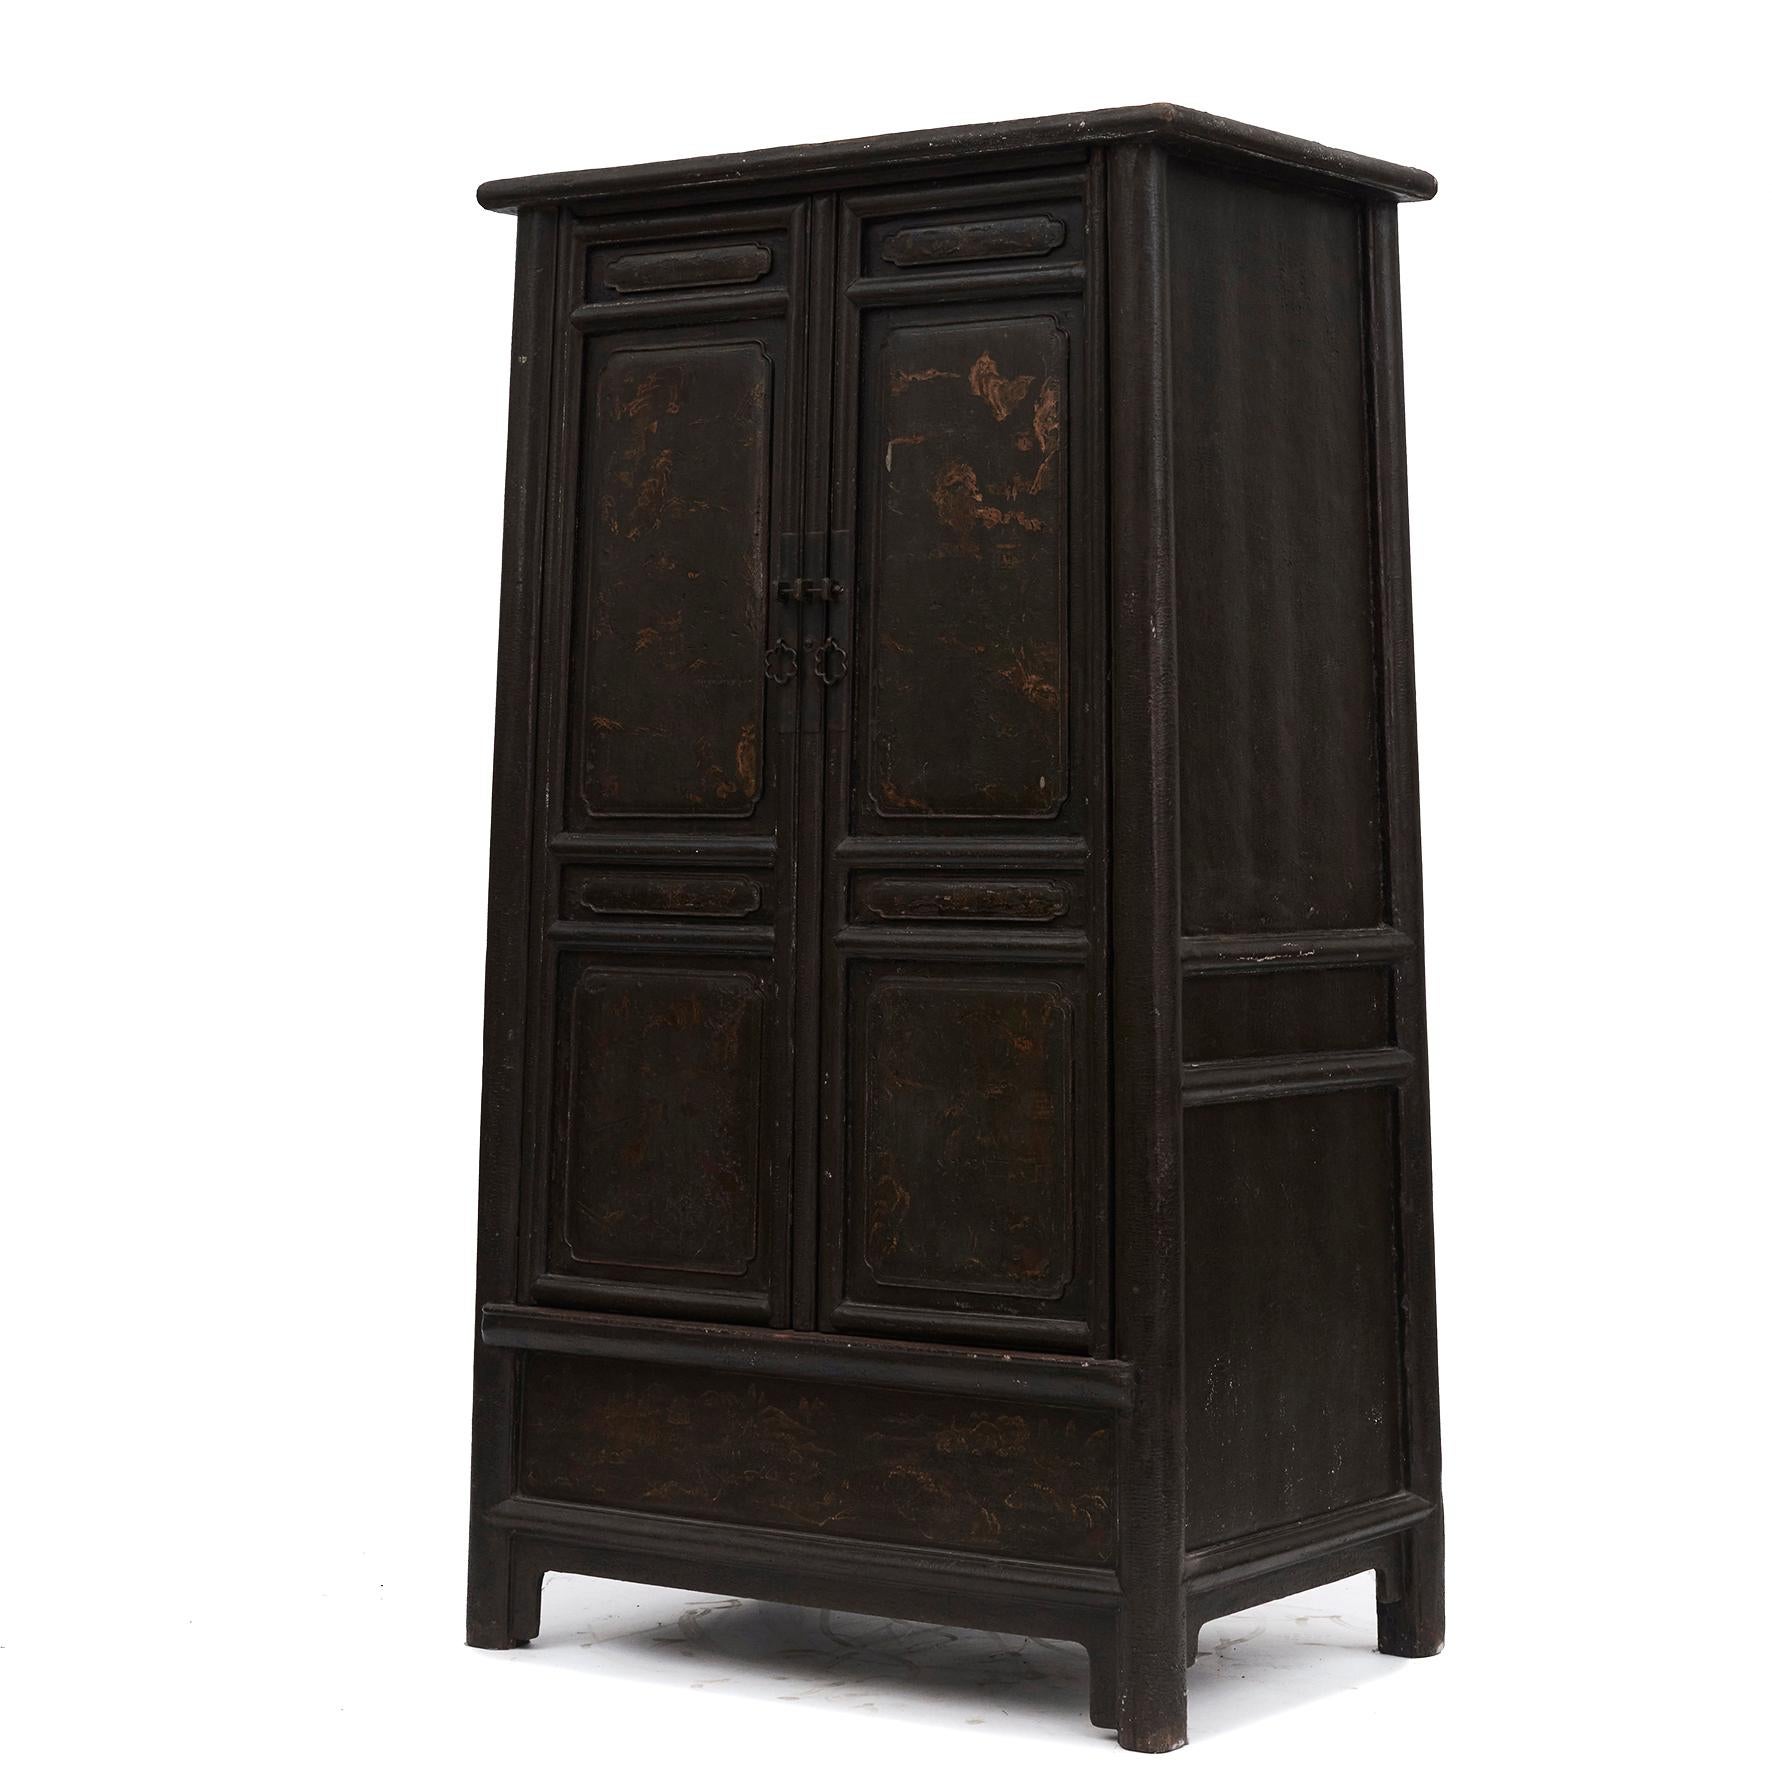 A stunning Chinese tapered cabinet from the 18th century, black lacquered with original gilt chinoiserie motifs.
Created in China during the Qing dynasty using solid Elm wood with black lacquered finish and adorned with gilt chinoiserie motifs on